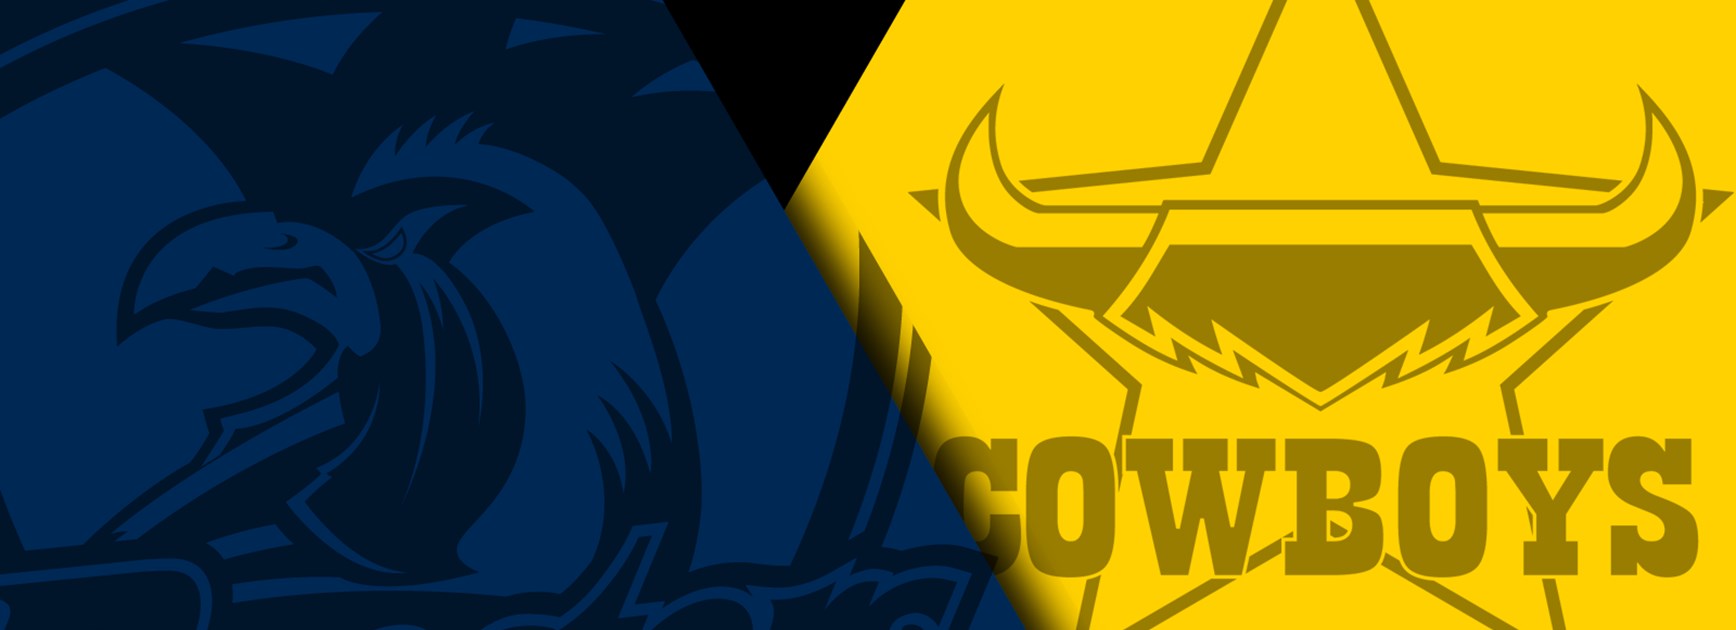 Roosters-Cowboys preview.